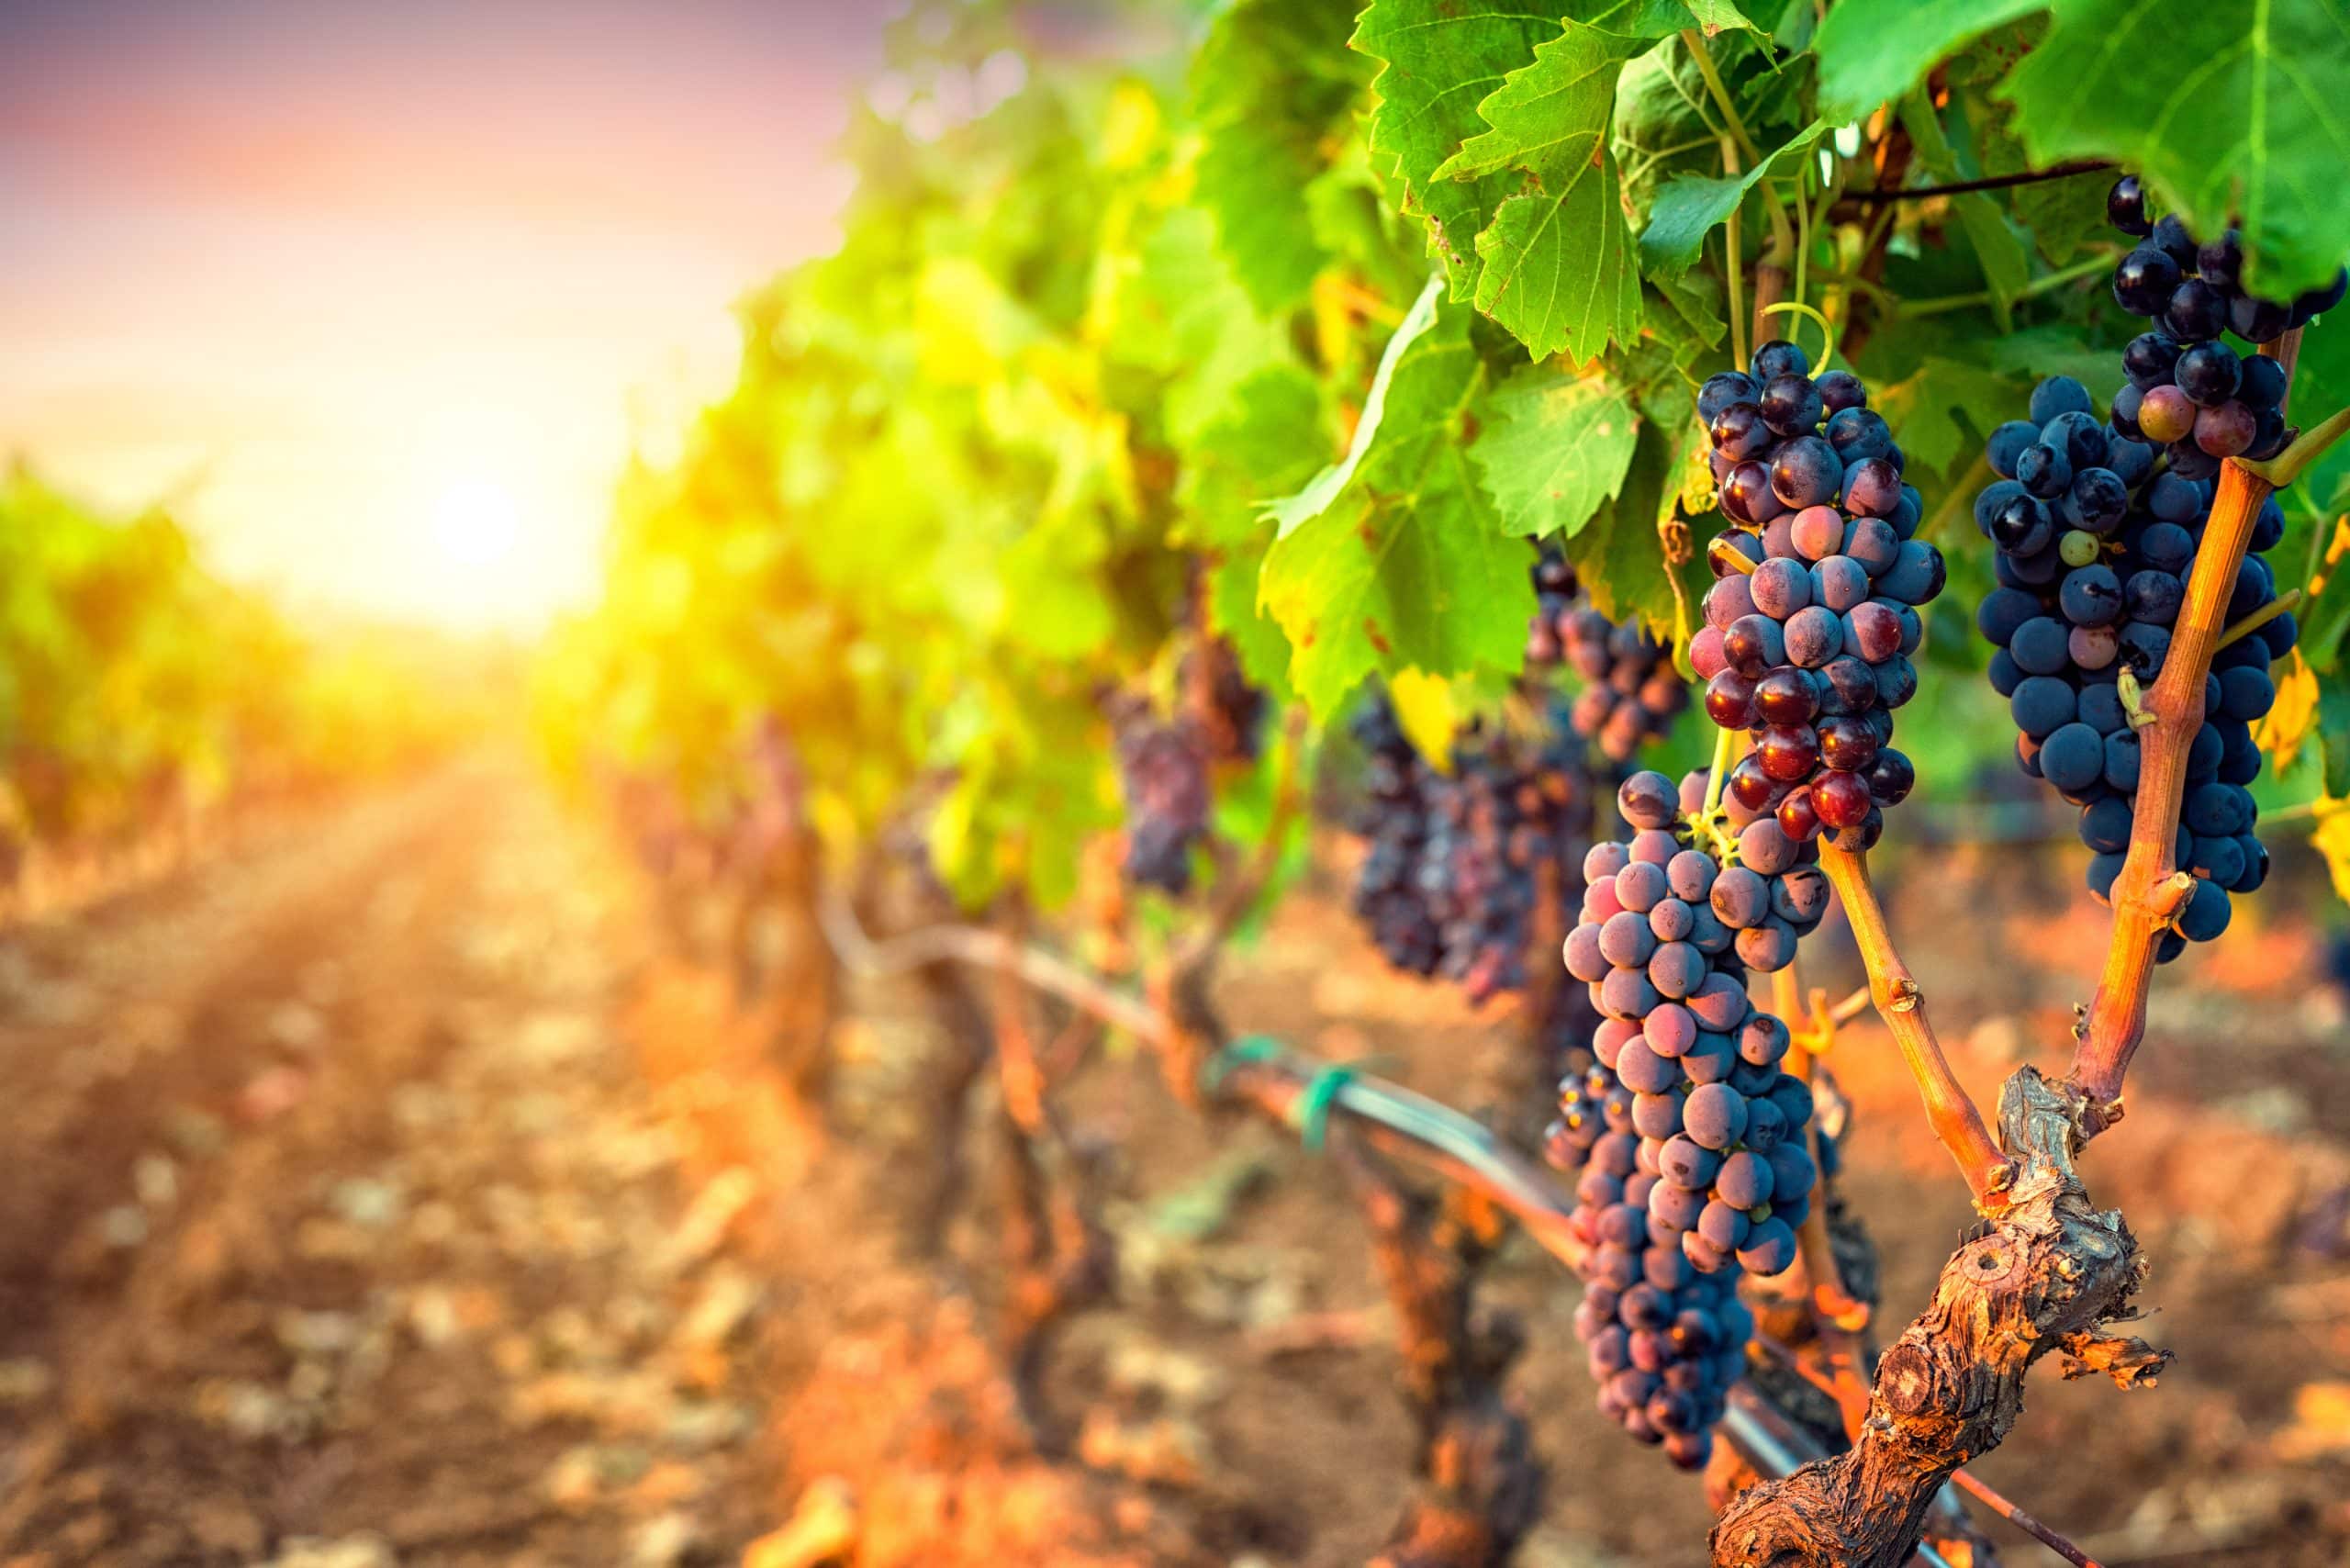 Bunches of grapes in the rows of vineyard at sunset